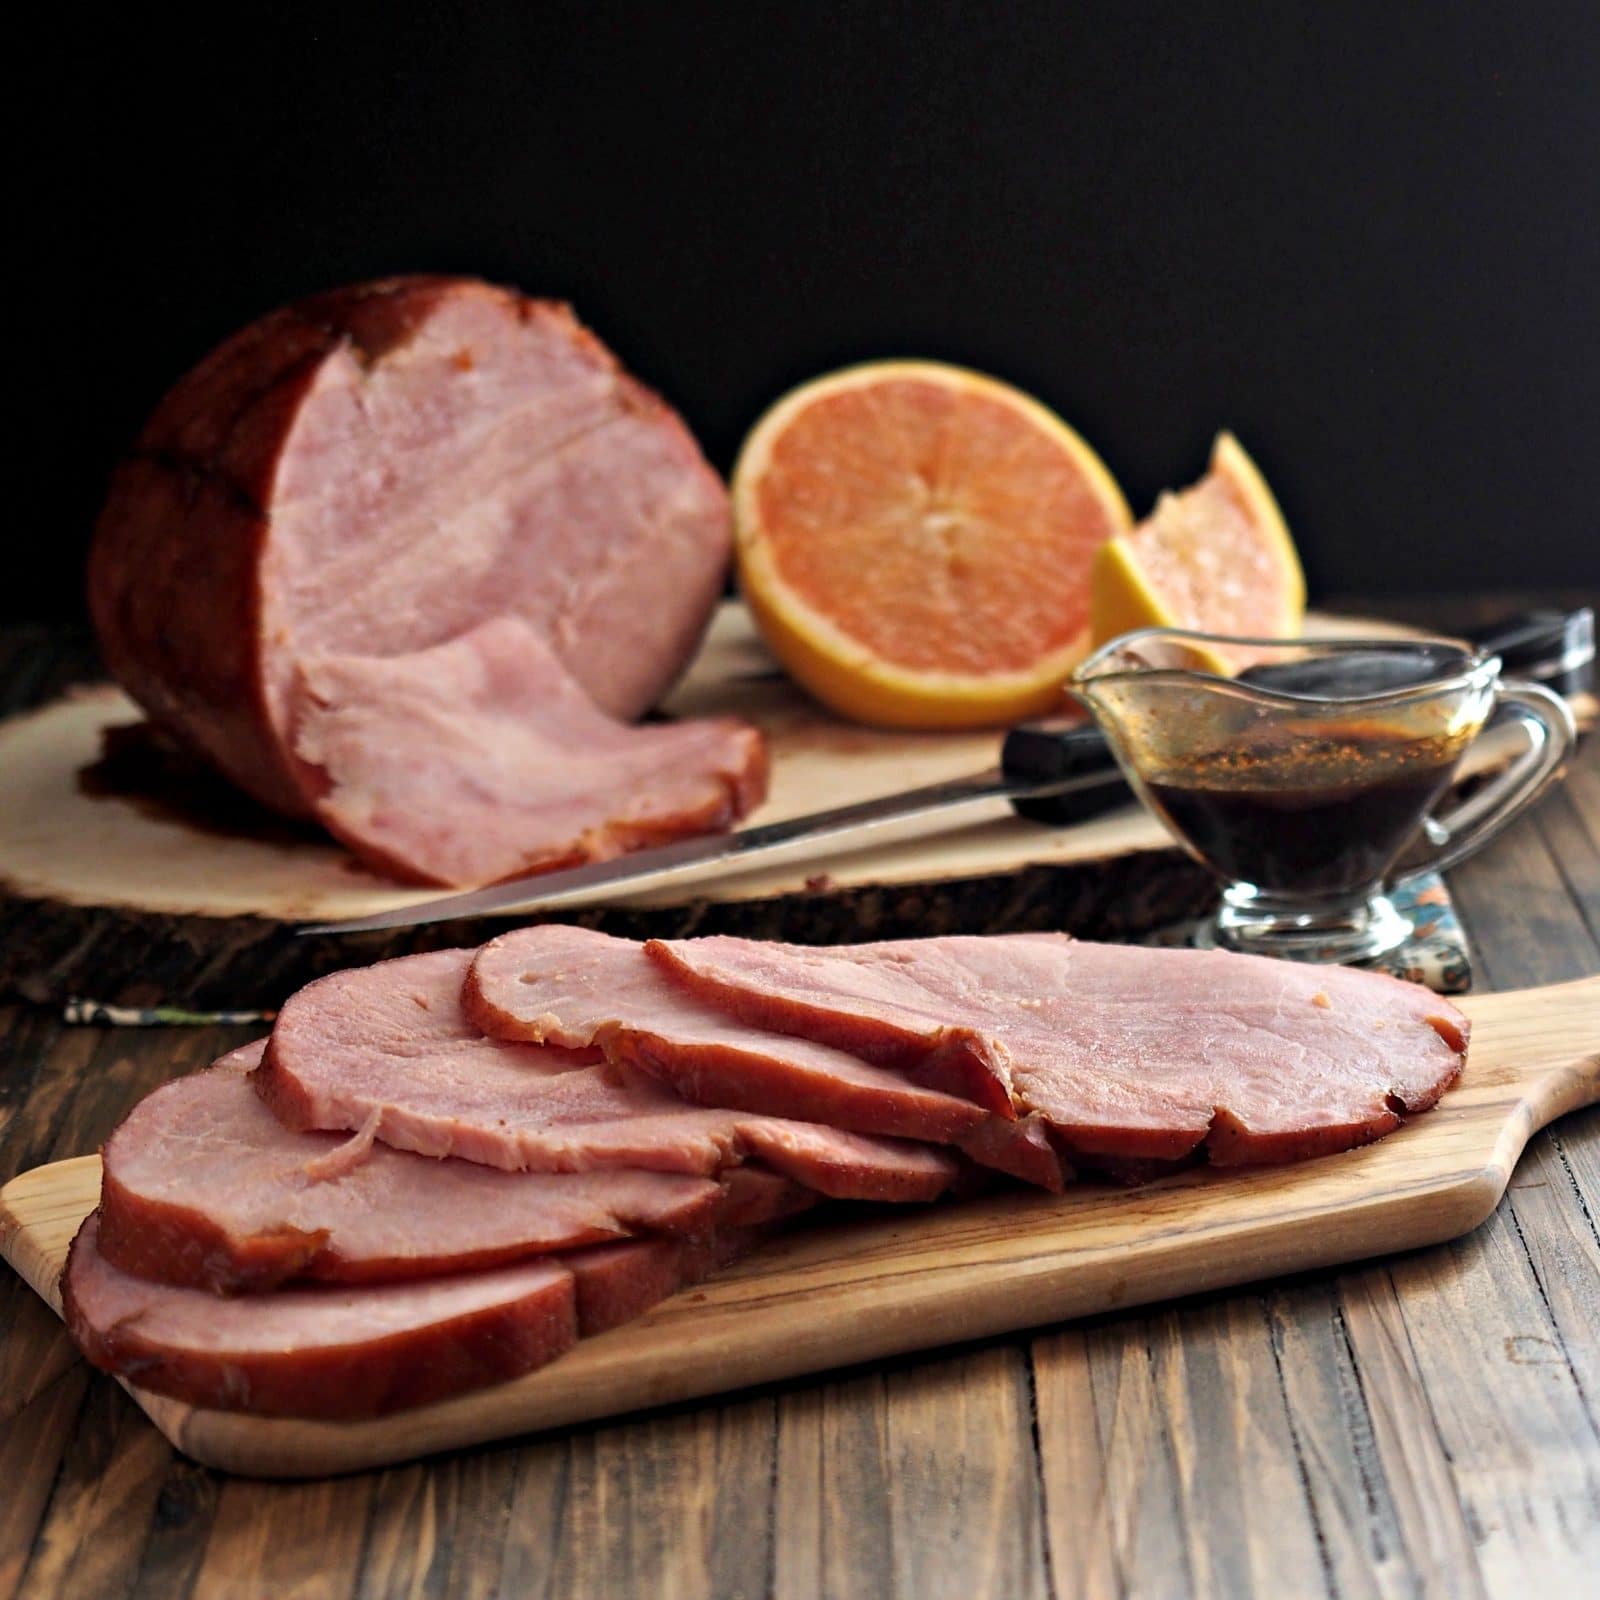 Spiced Grapefruit Molasses Glazed Ham - Jones Dairy Farm Family Ham, grapefruit juice, brown sugar, molasses and the perfect blend of spices. Perfection. Simply Sated